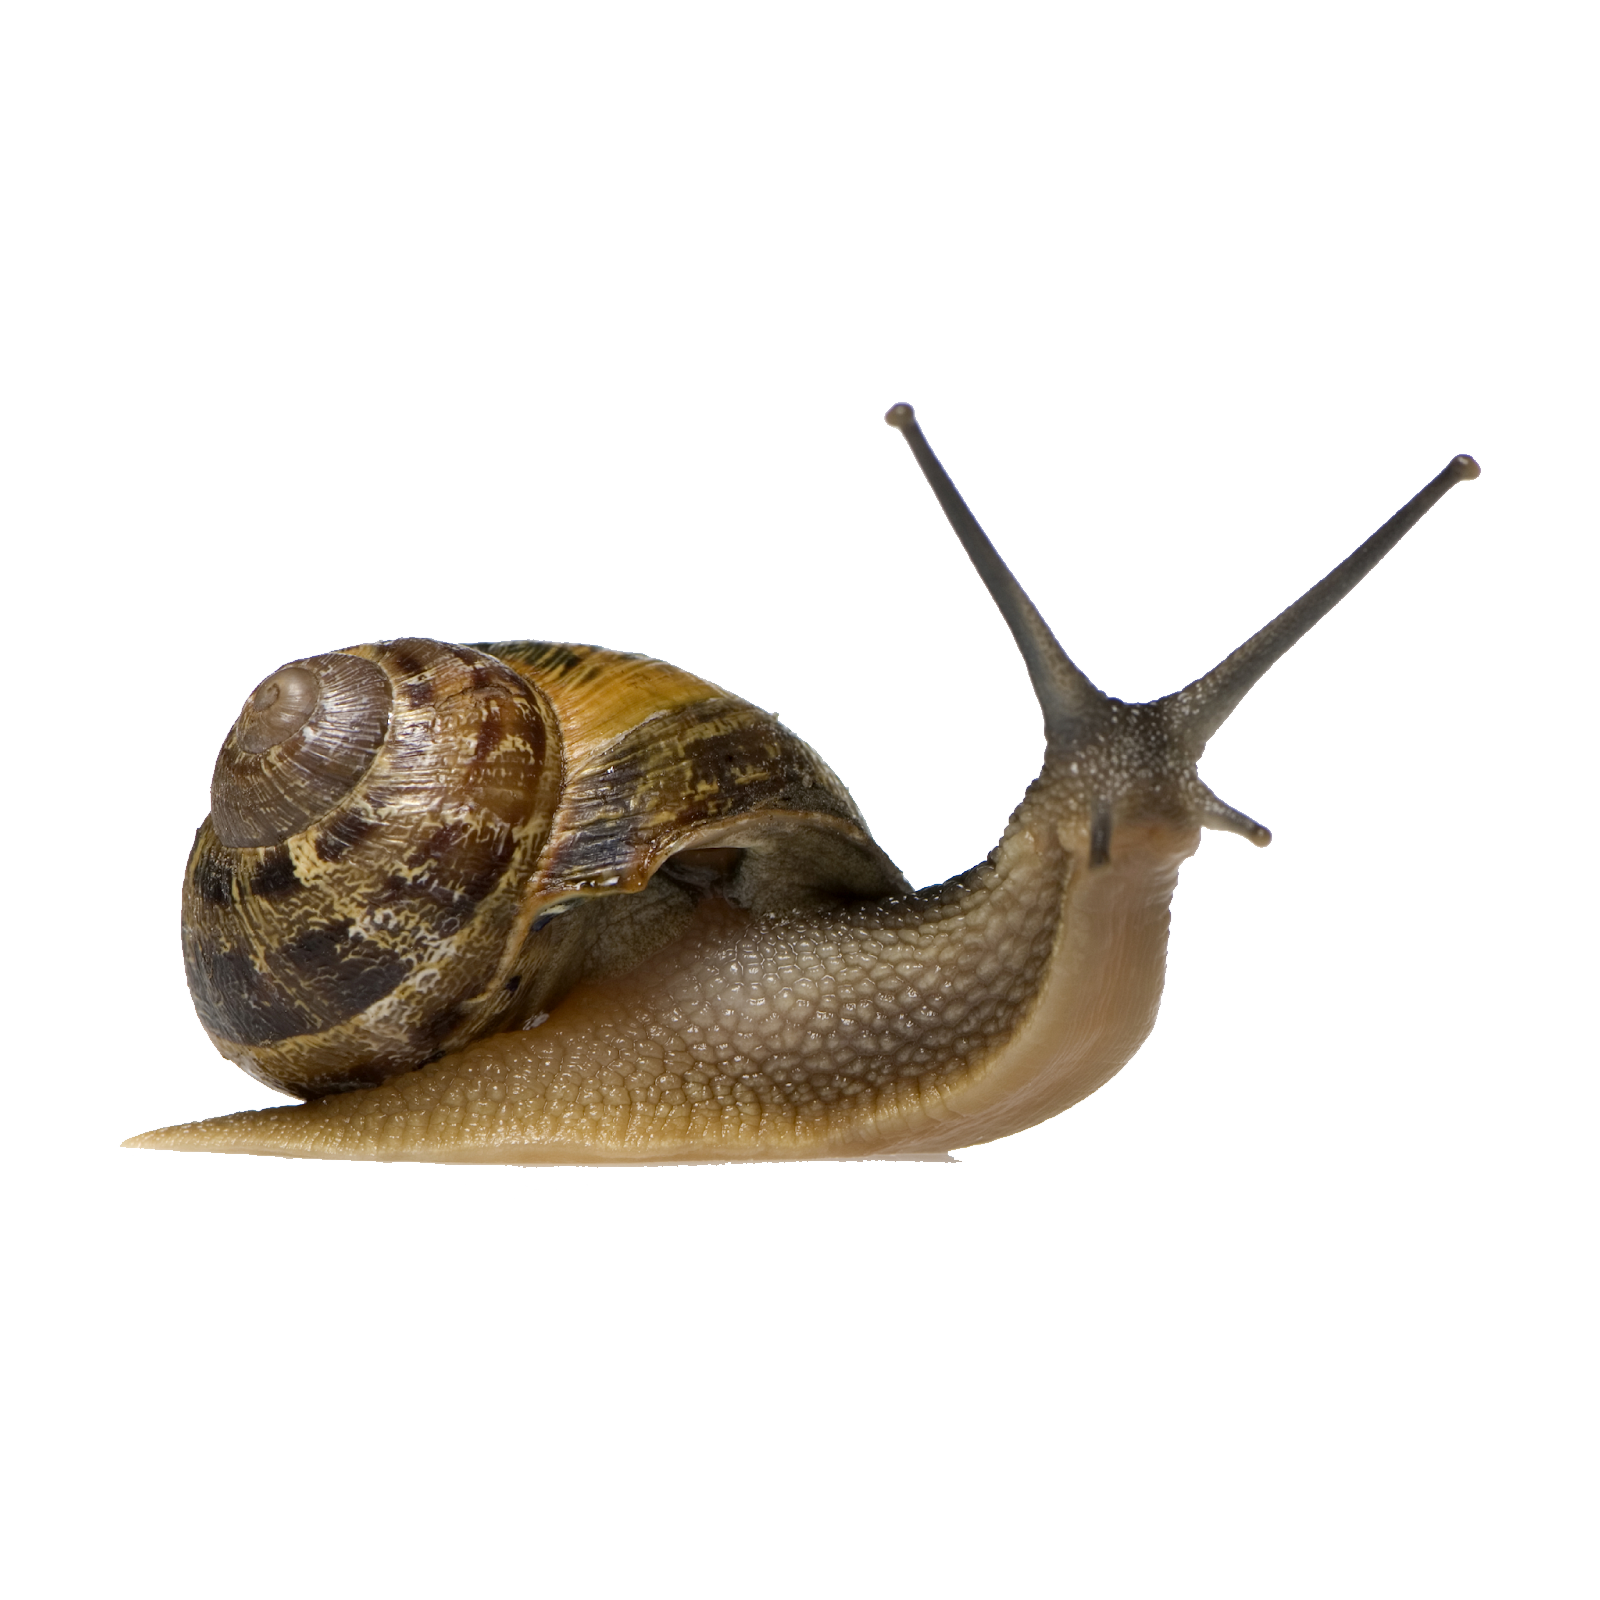 Giant African Land Snail Transparent Gallery